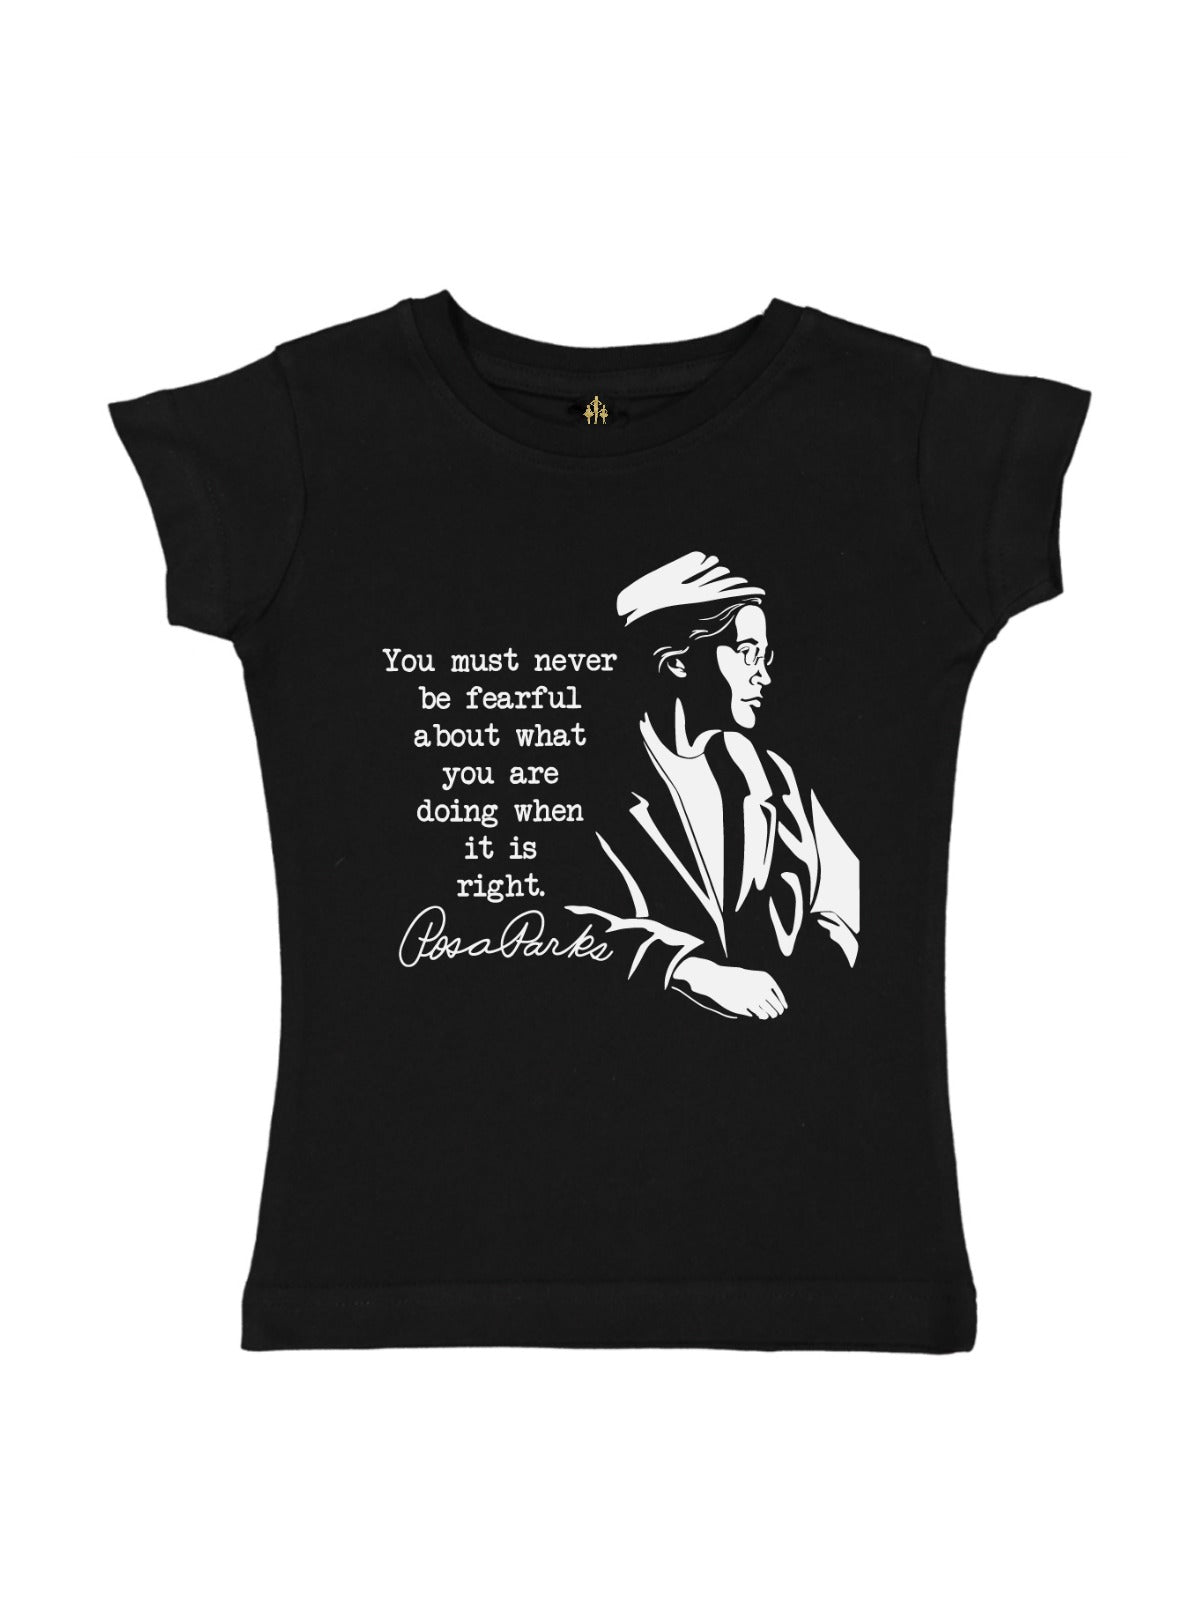 rosa parks fear quote girls shirt